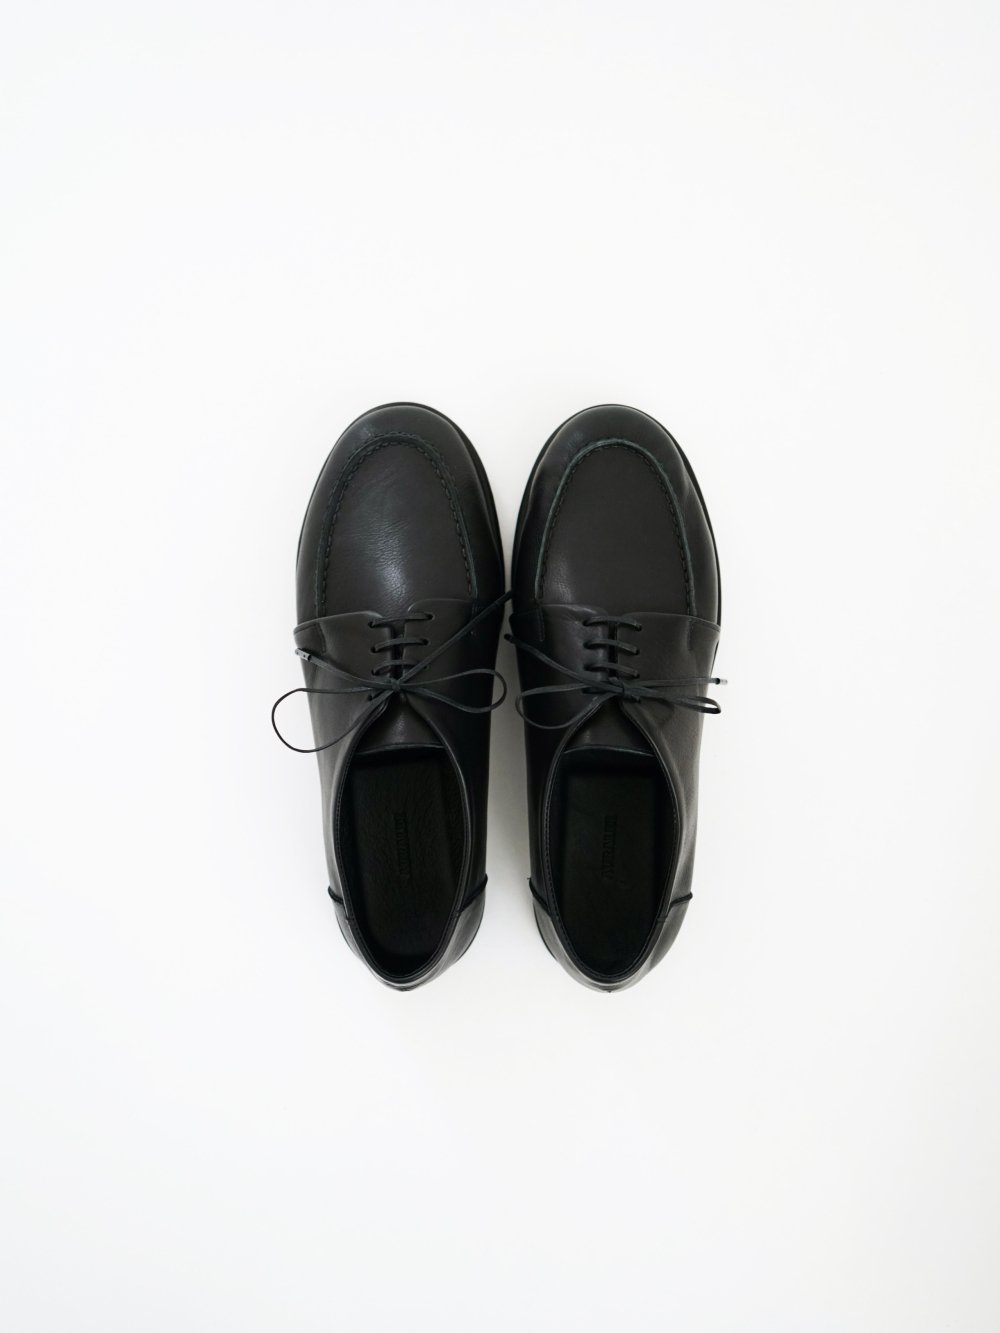 AURALEE LEATHER SHOES / BLACK 